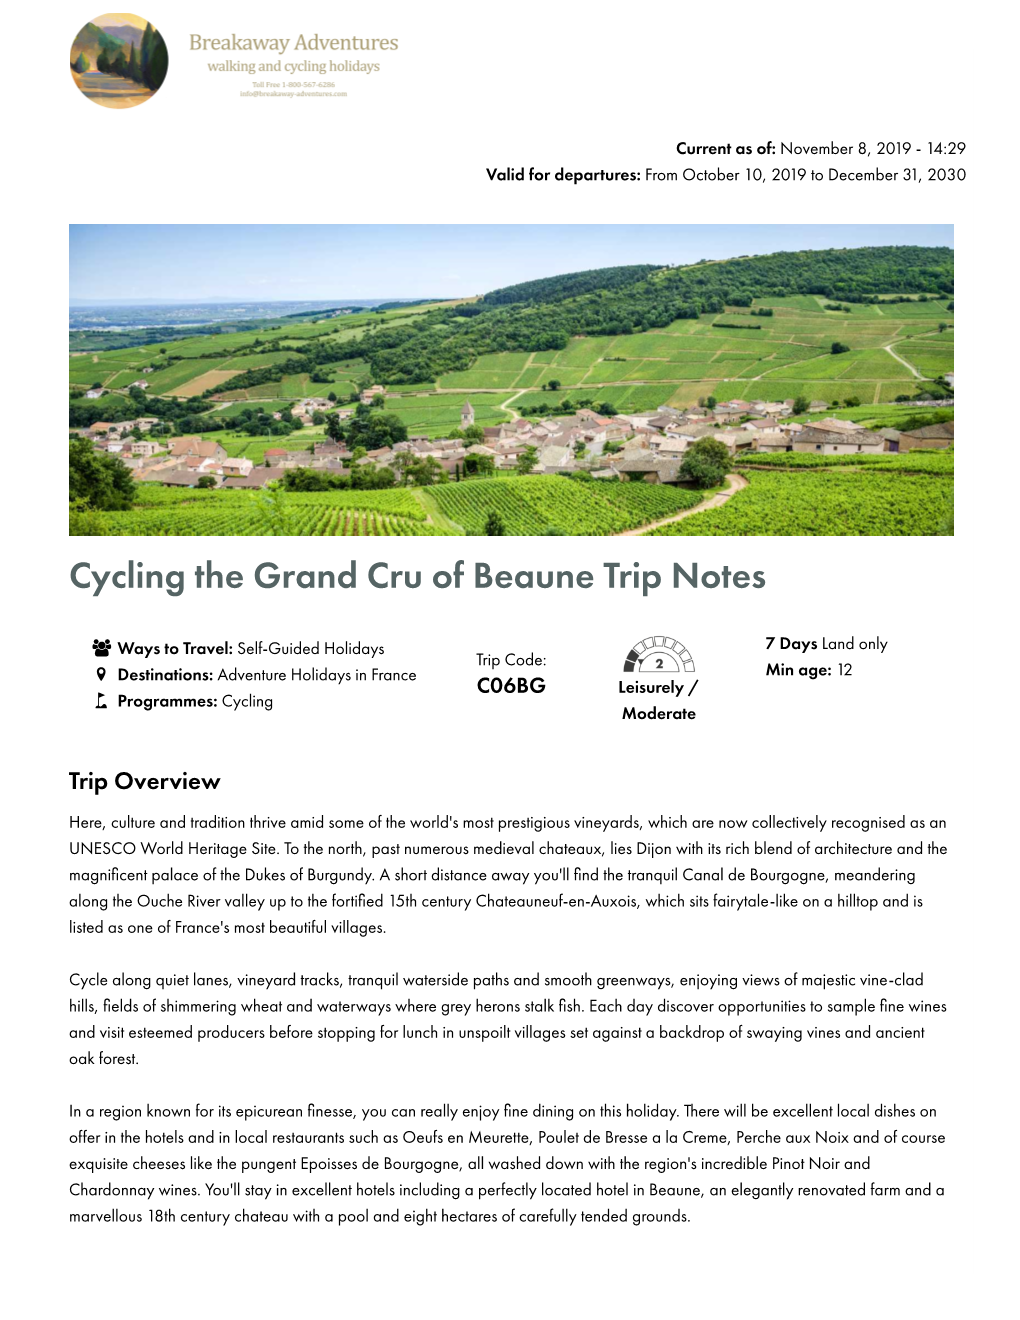 Cycling the Grand Cru of Beaune Trip Notes